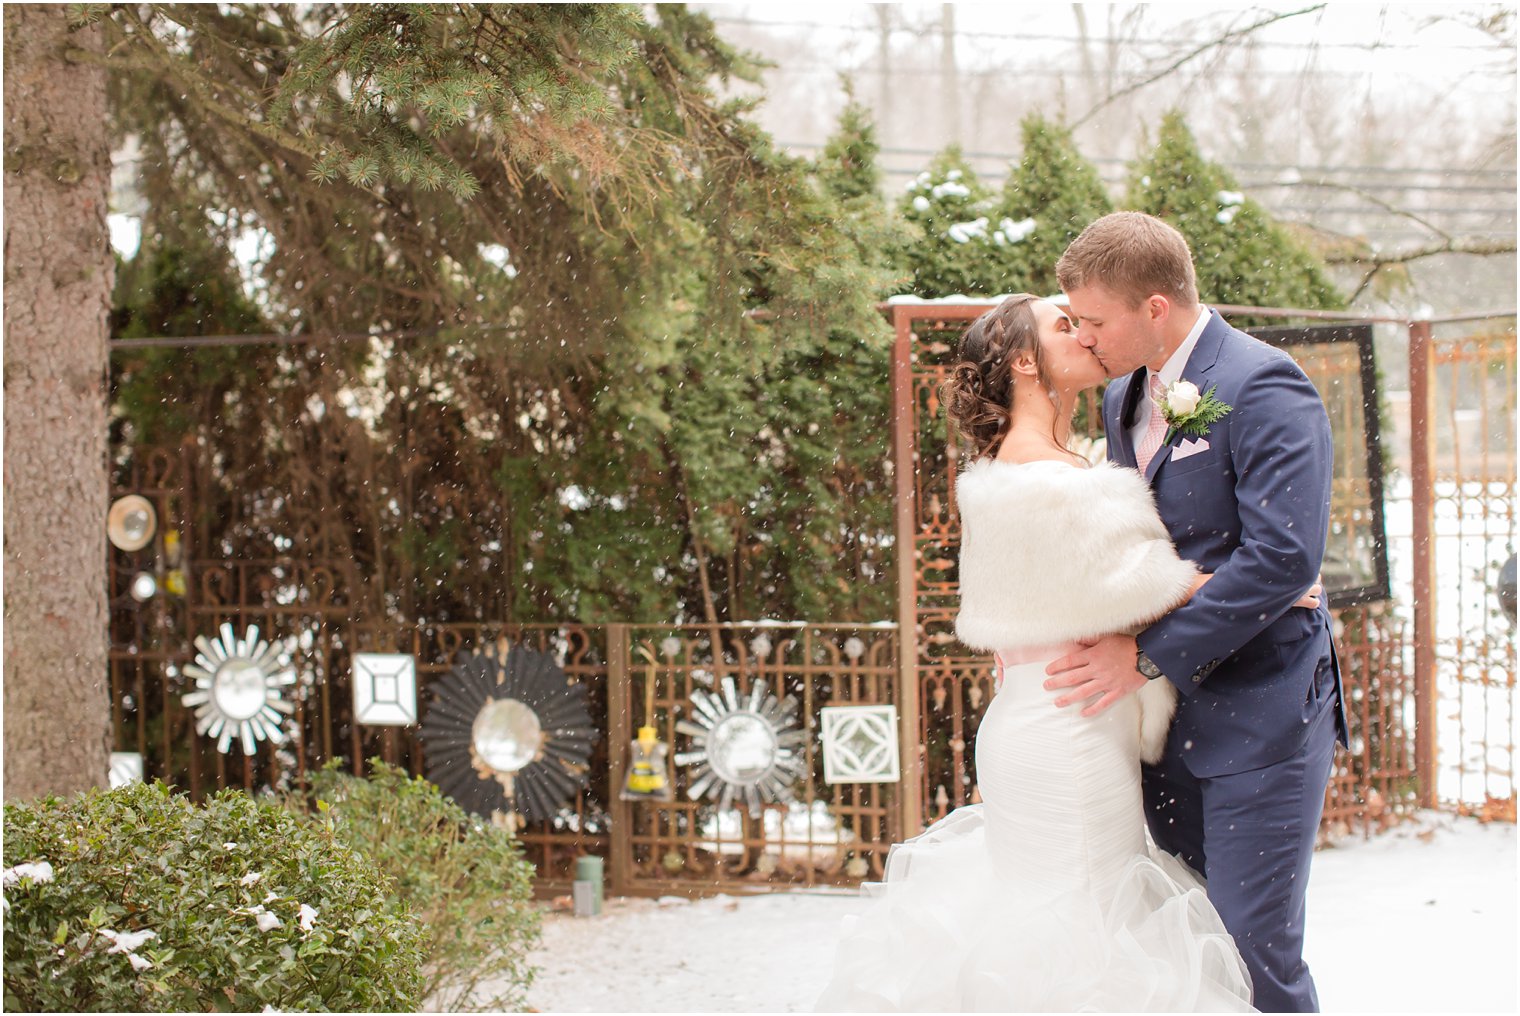 Winter wedding with snow at Stone House at Stirling Ridge in Warren, NJ